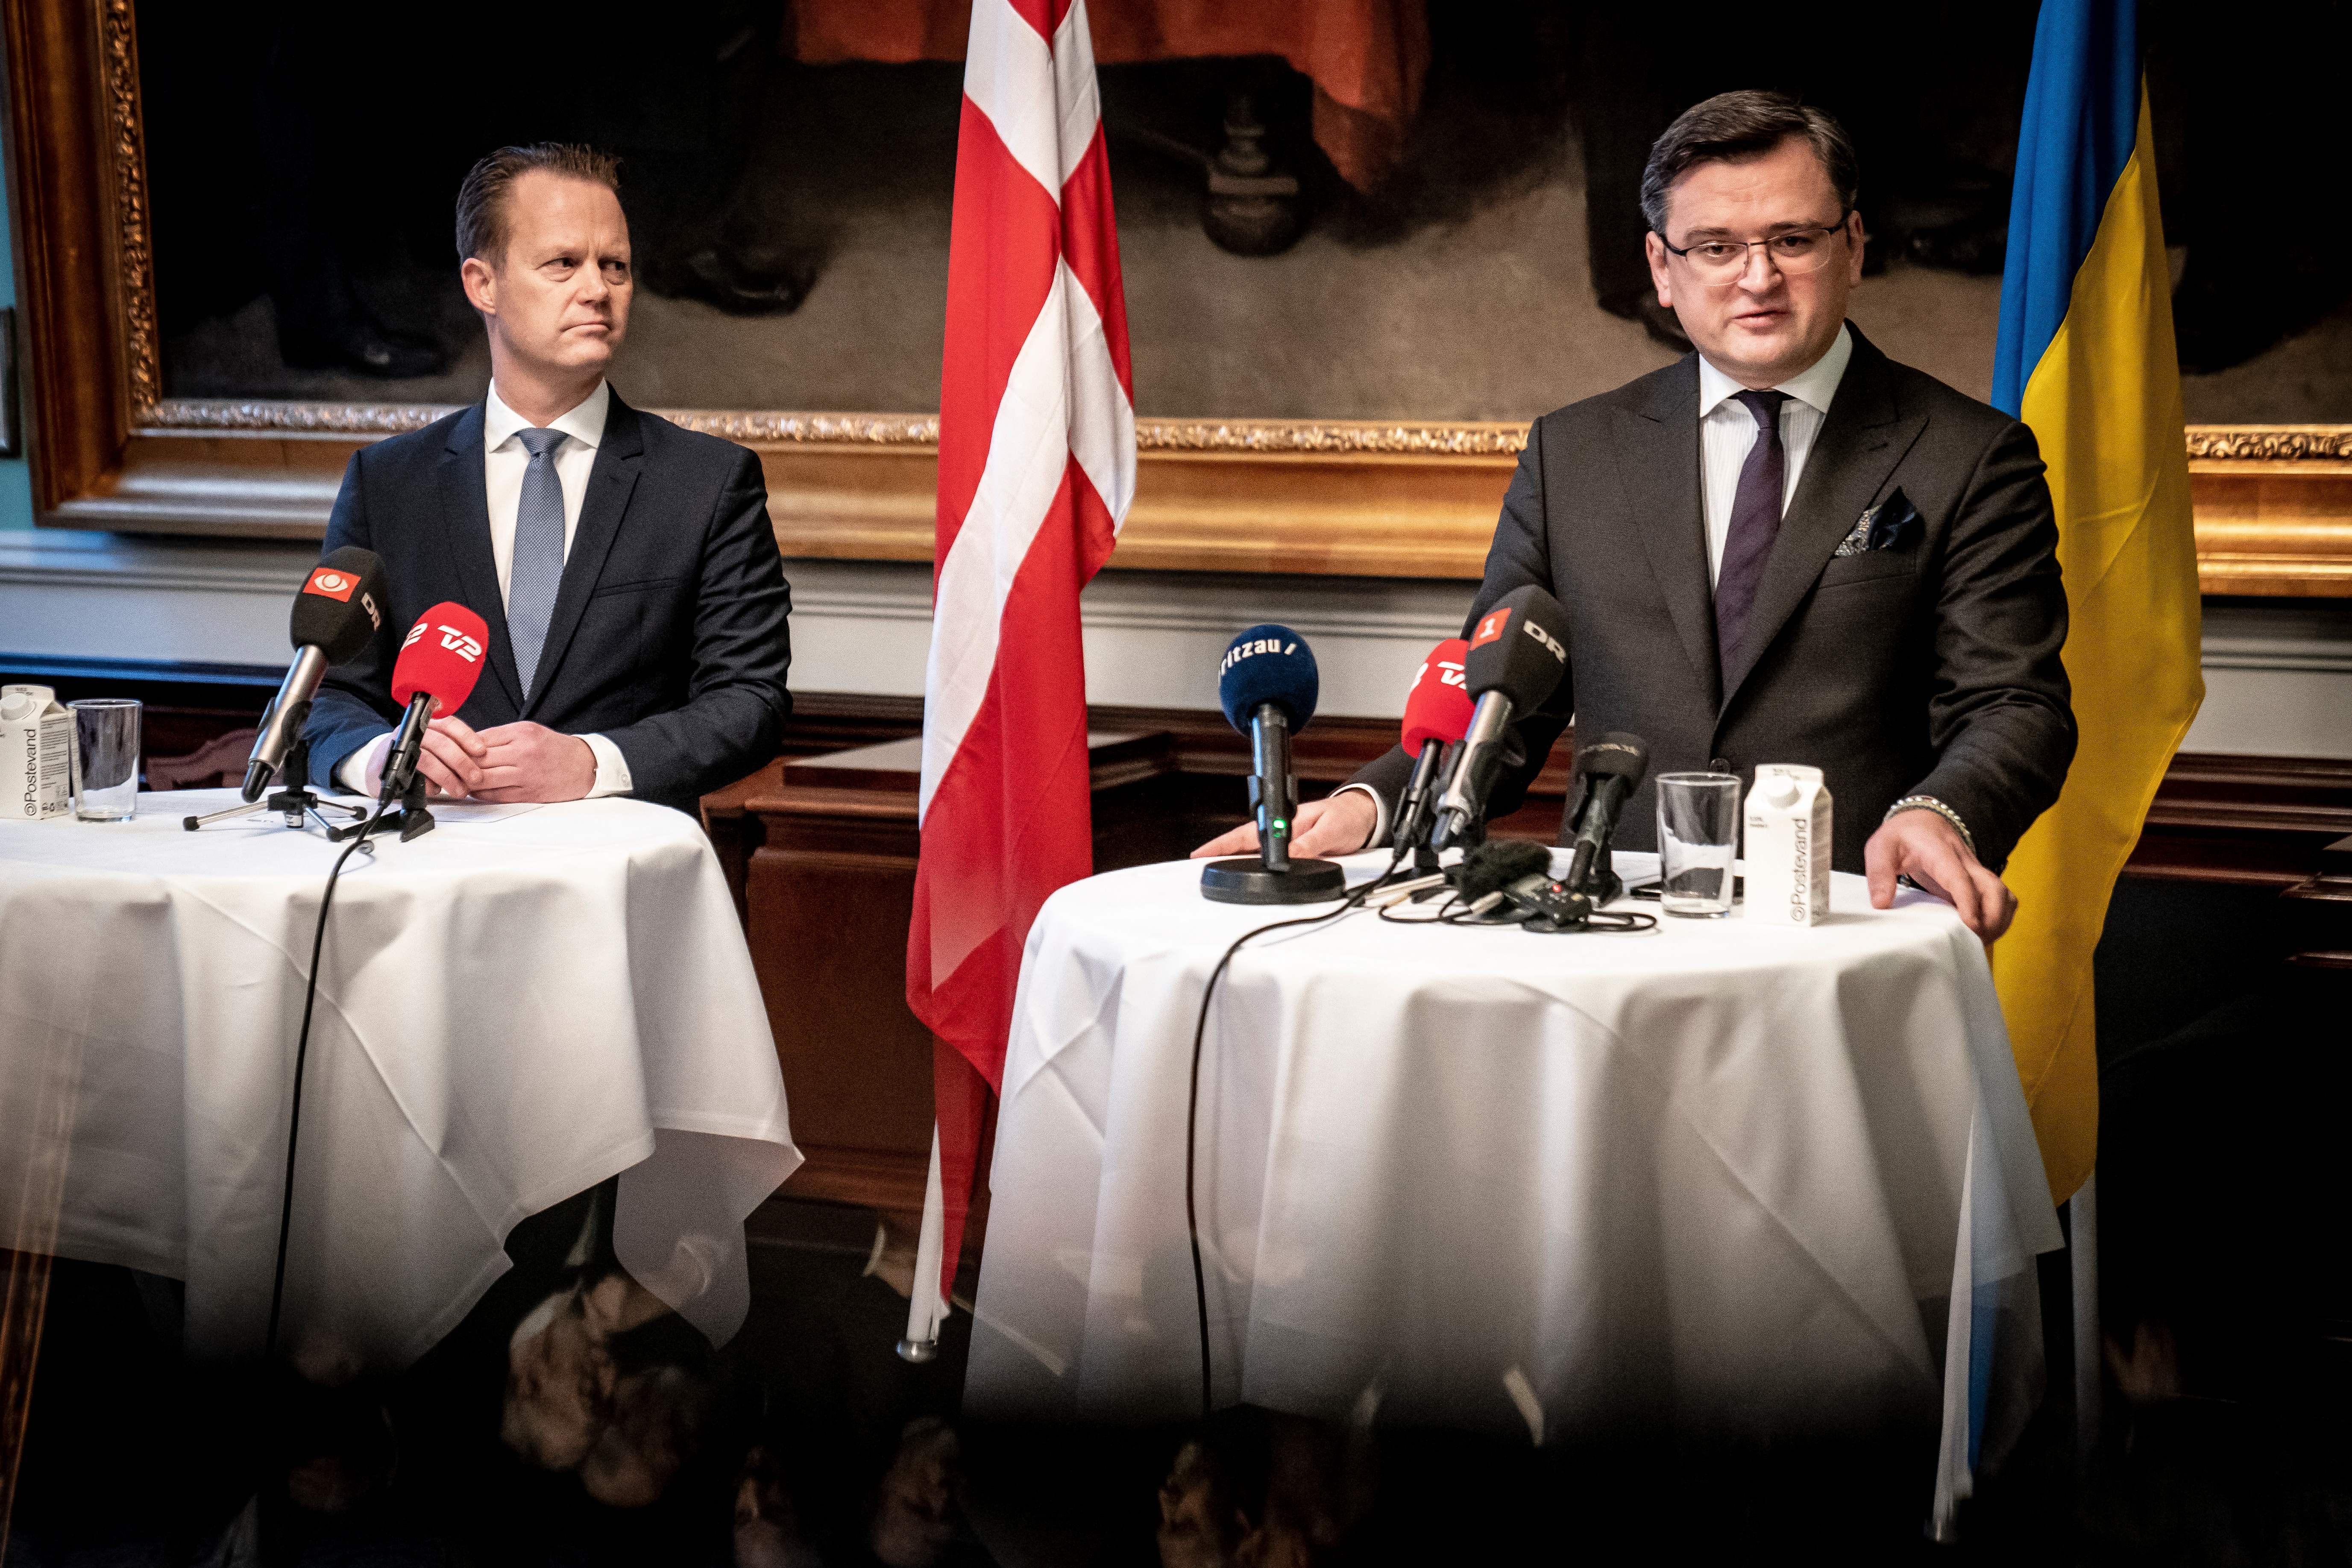 Danish Foreign Minister Jeppe Kofod (L) and Ukrainian Foreign Minister Dmytro Kuleba give a statement at Christiansborg in Copenhagen, Denmkark, on January 27.